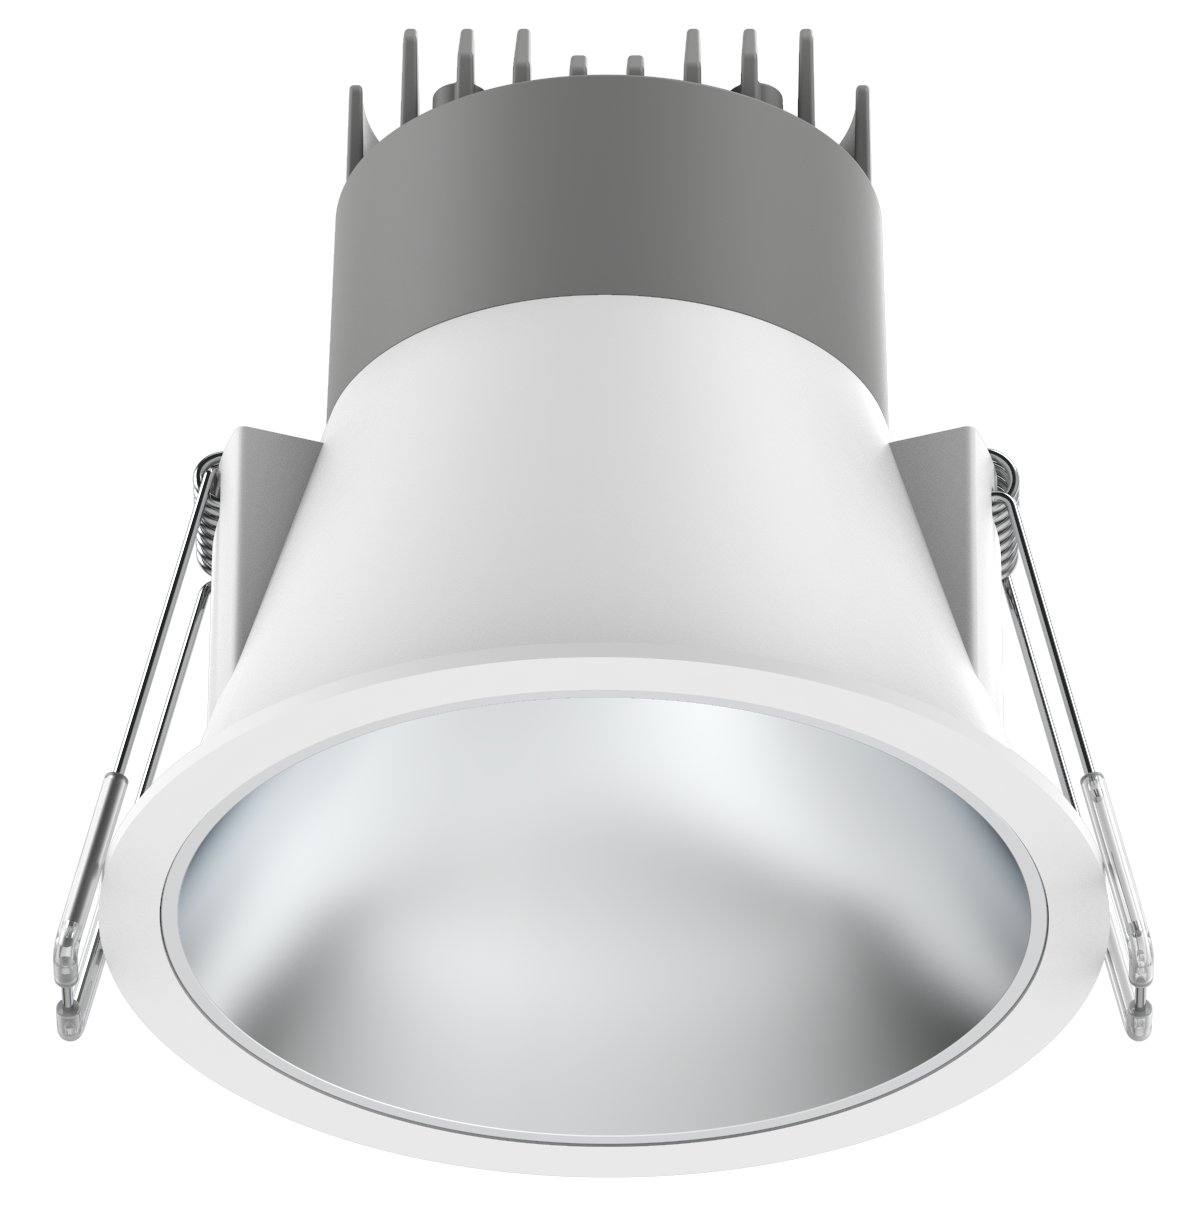 ALL-IN-ONE COB 10W Low glare(UGR＜5)Downlight Featured Image